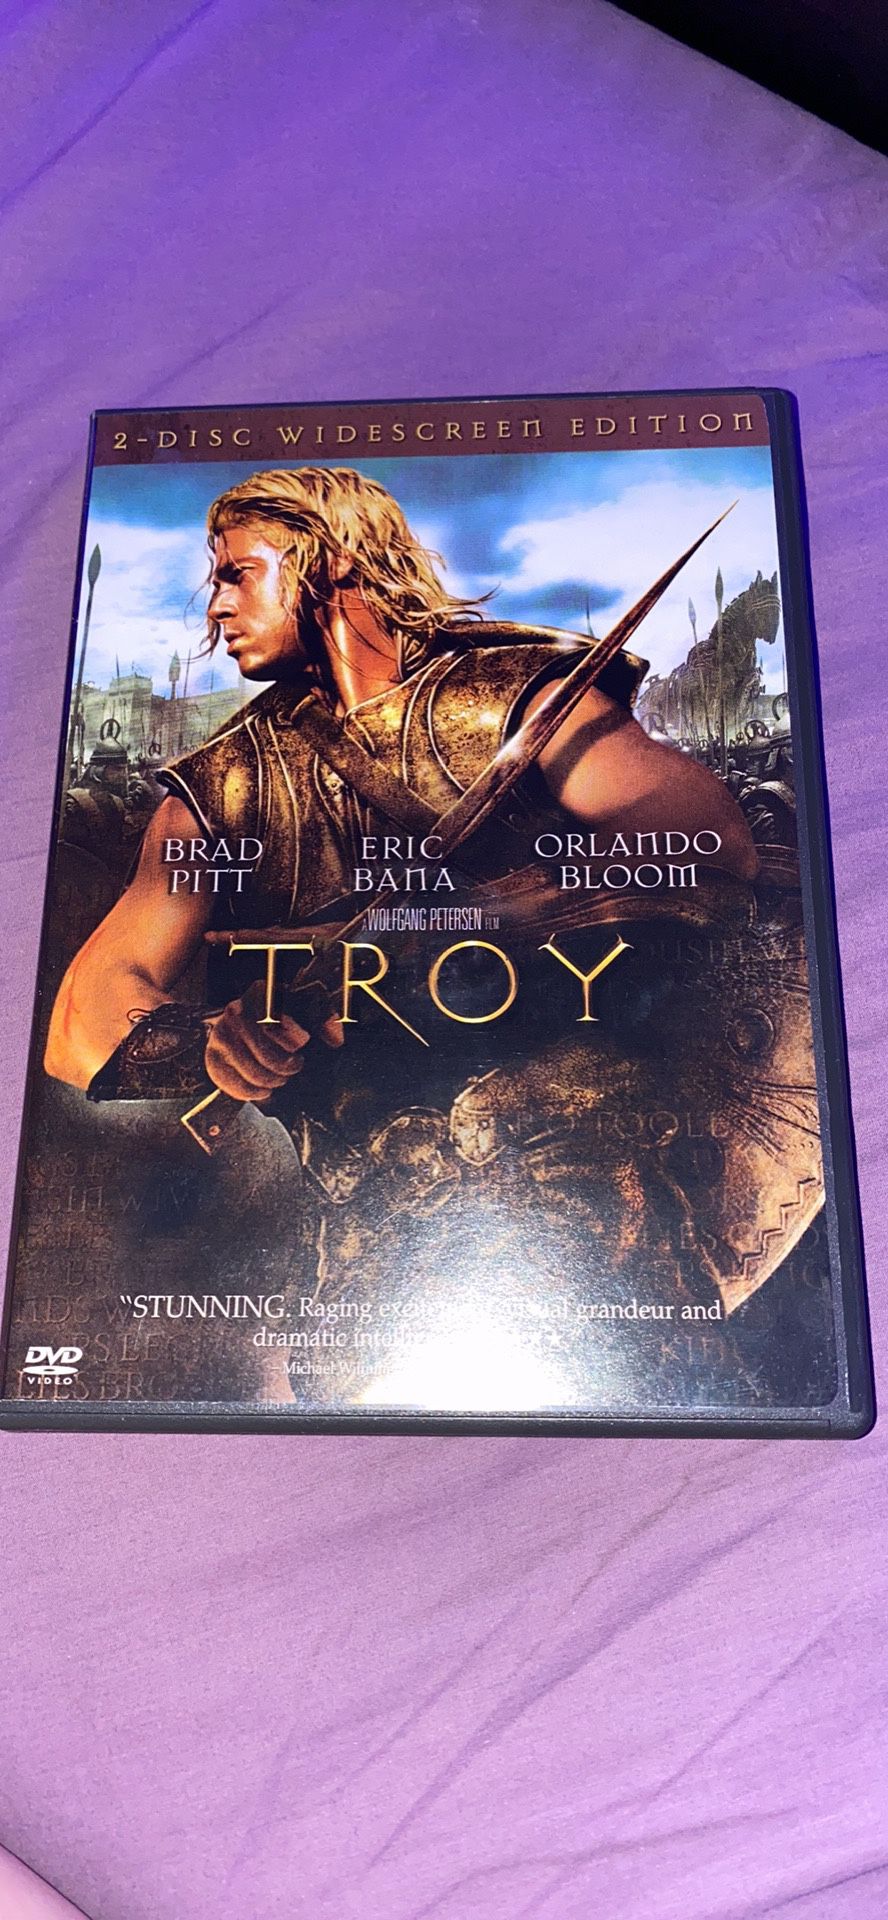 TROY 2 disc widescreen edition DVD